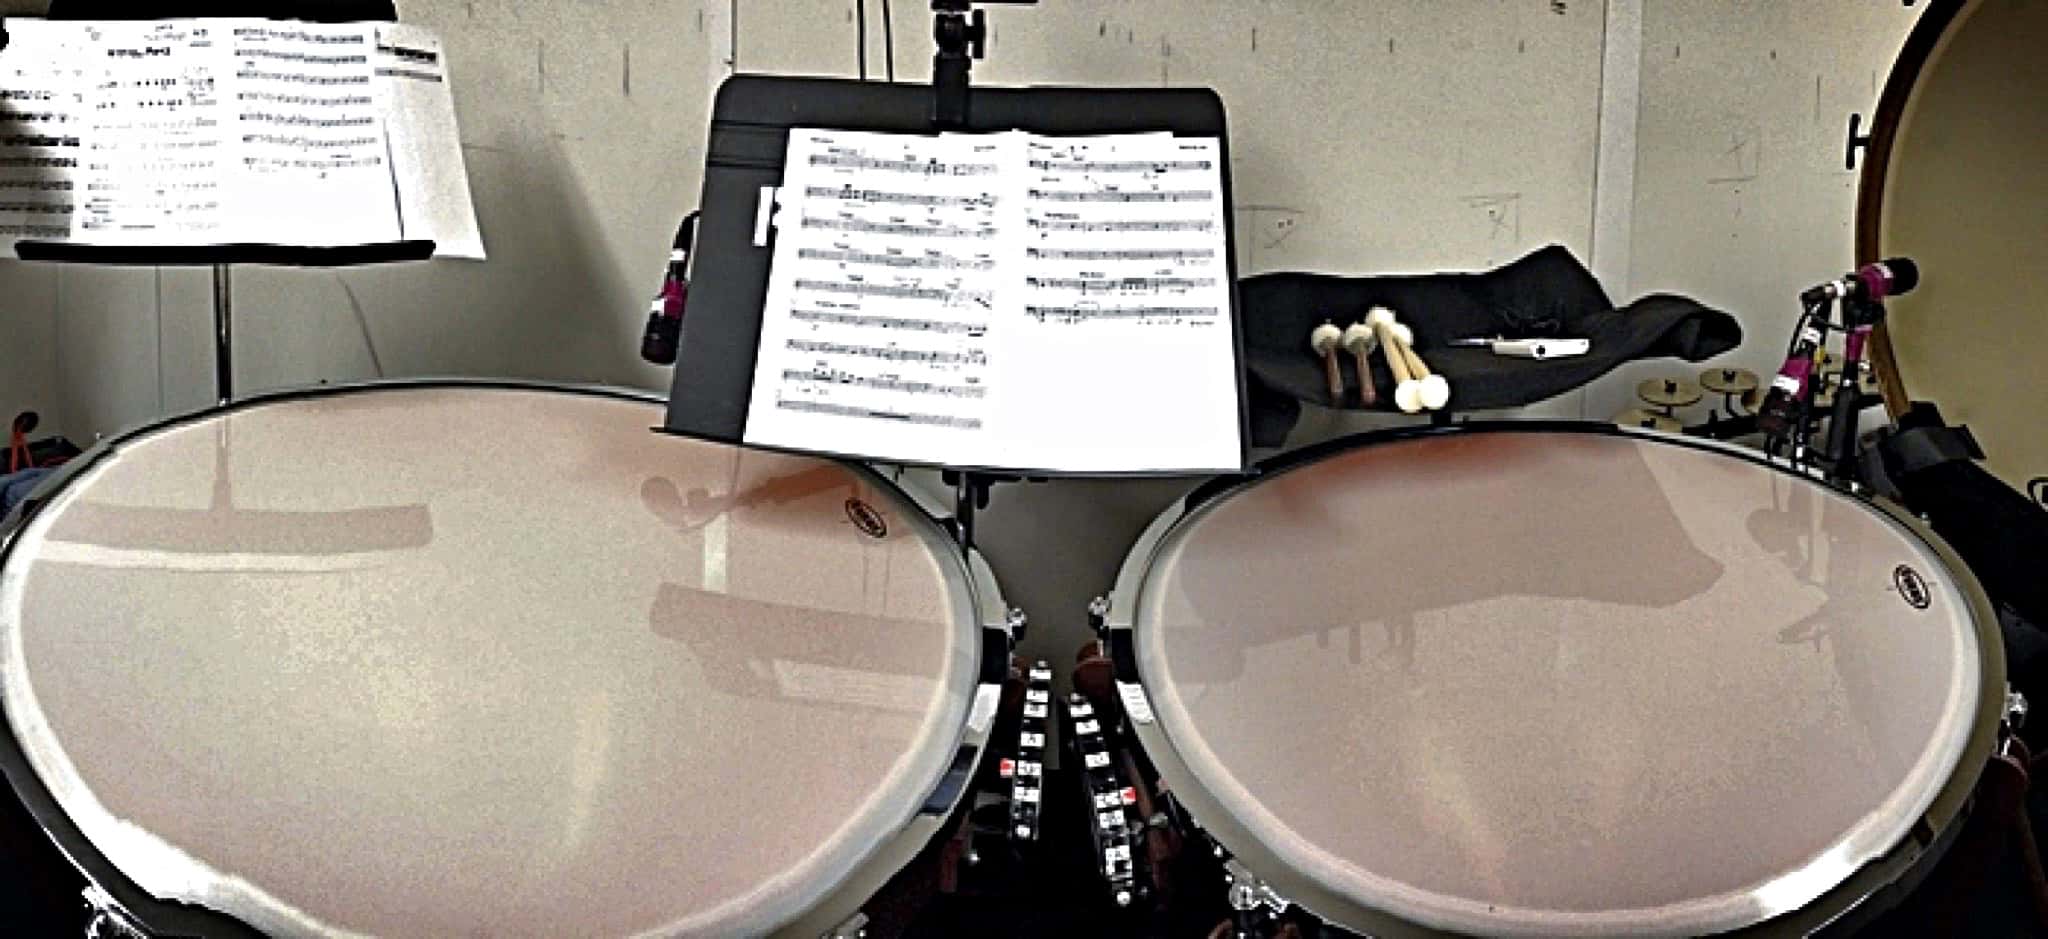 Brian Kilgore's percussion setup for the International Tour of Pippin at the Hollywood Pantages Theatre in Hollywood, California.